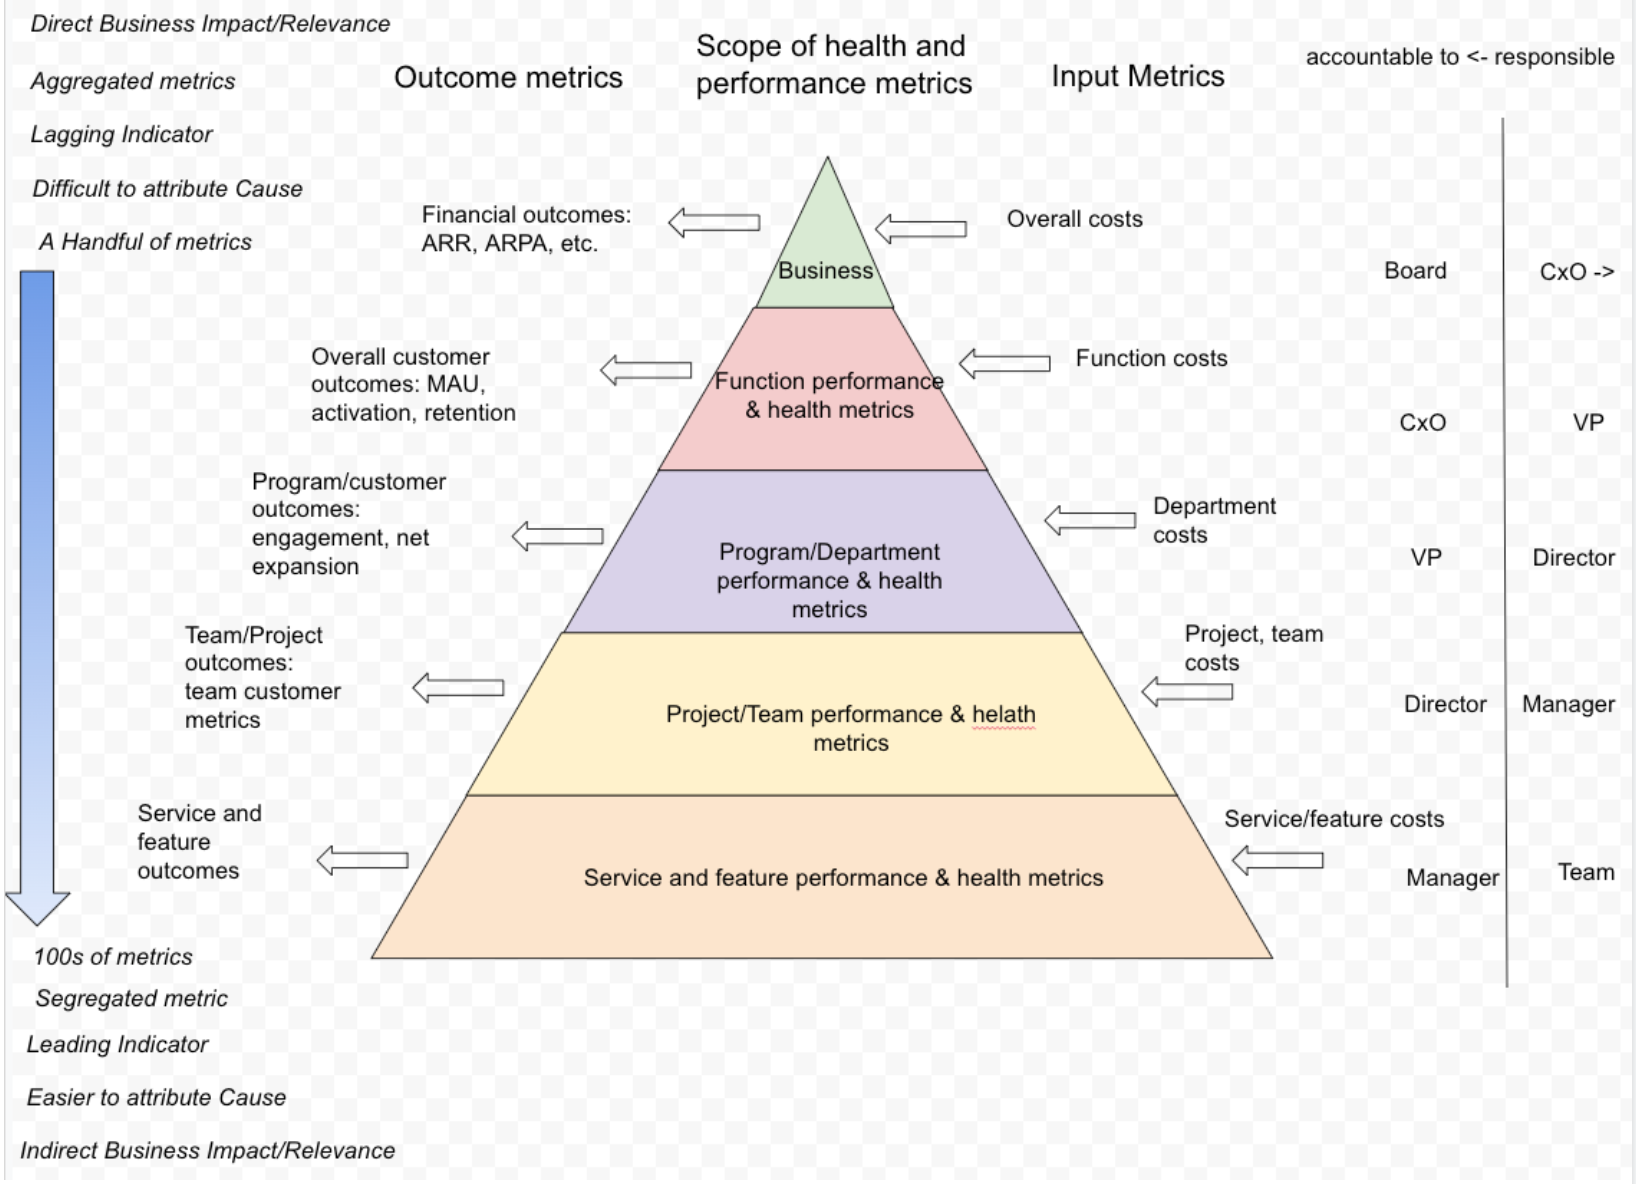 A pyramid breaking down the metrics levels described in the sections below